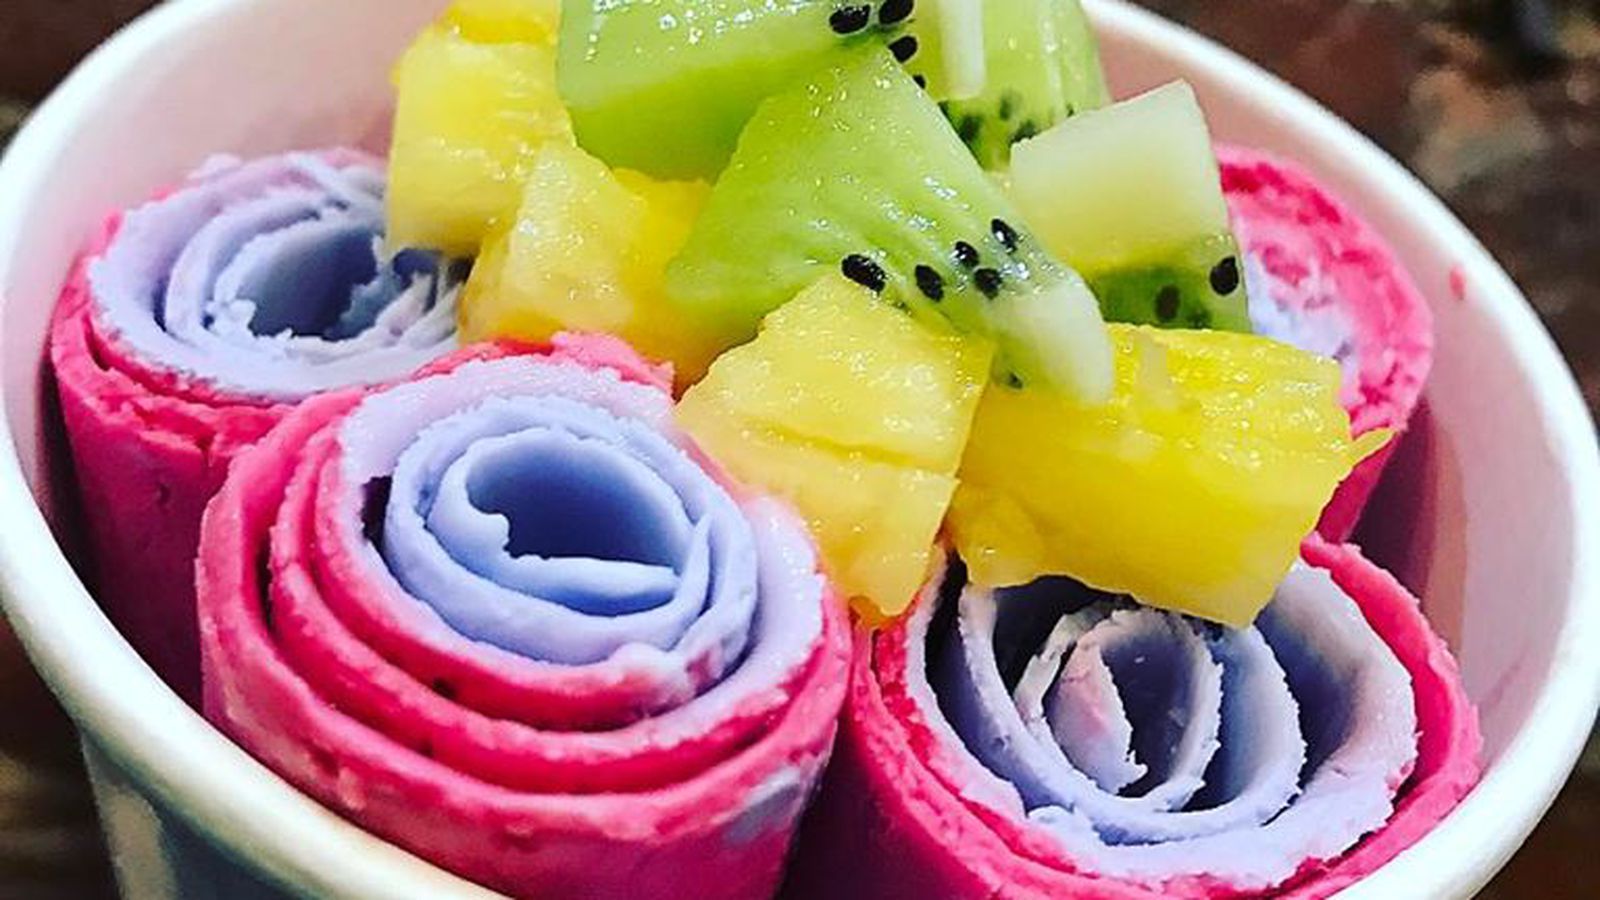 Juicy Spot Cafe Opens Thursday With Ice Cream Rolls, Smoothies, Juices, and More